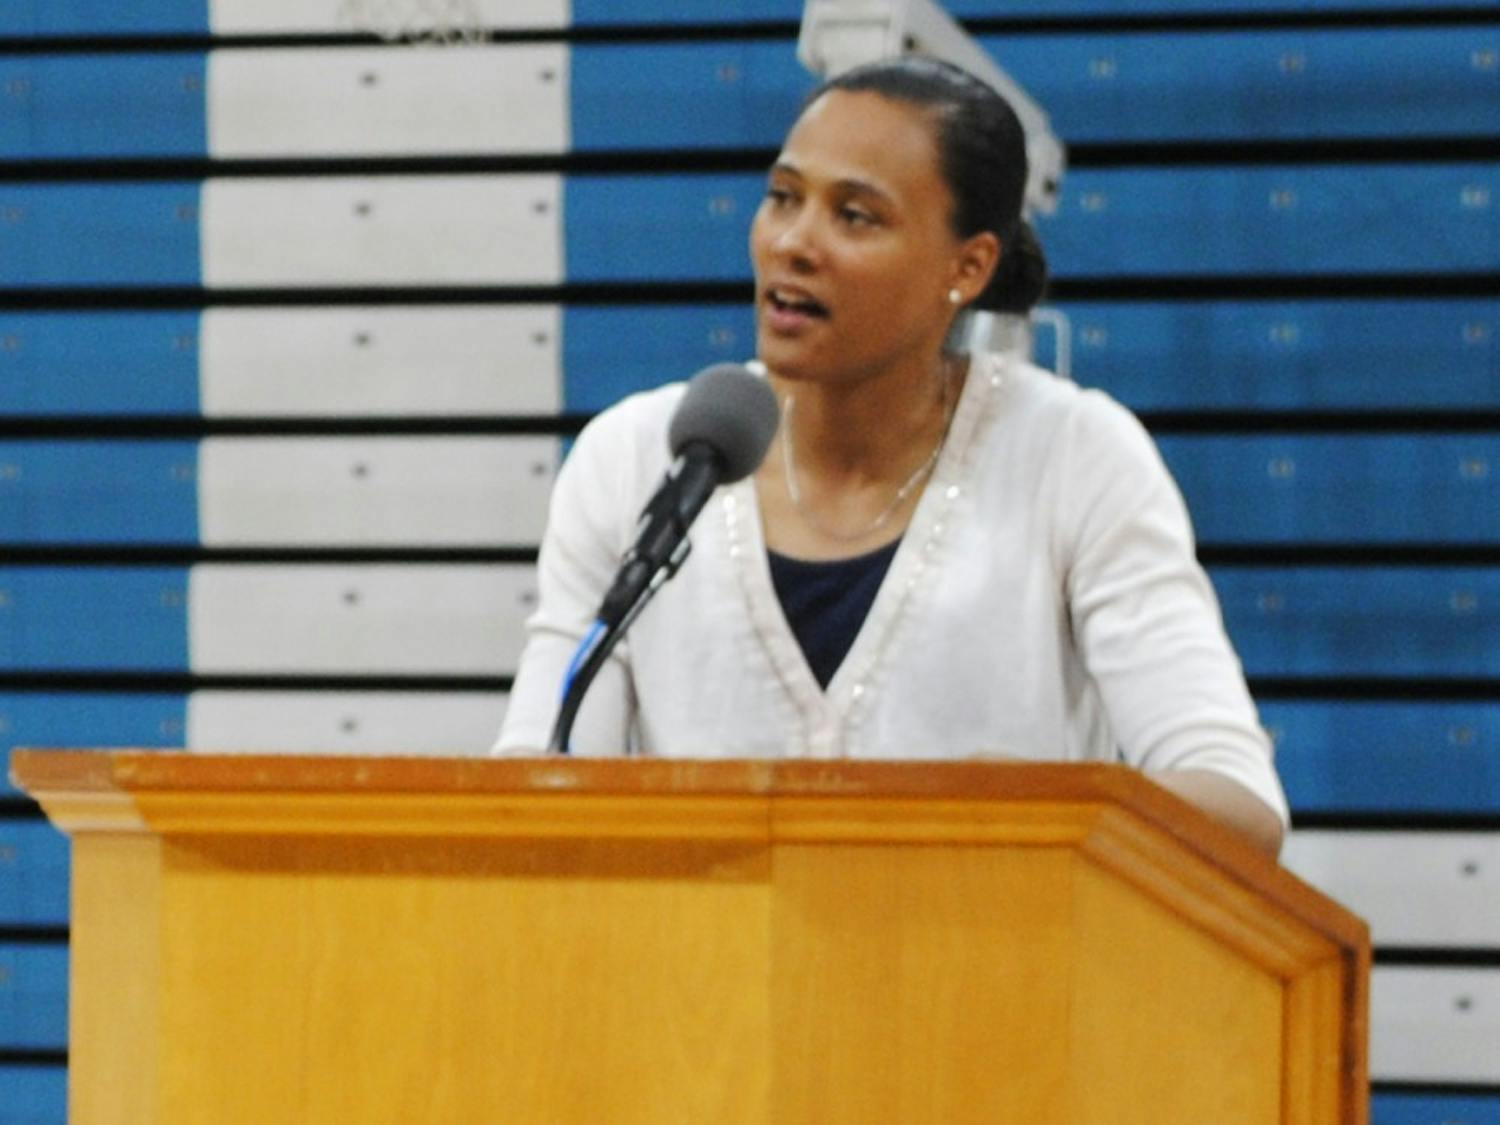 Famous disgraced ex-Olympic track runner Marion Jones came to UNC to speak to all varsity athletes about her experiences and to encourage them to make good choices.